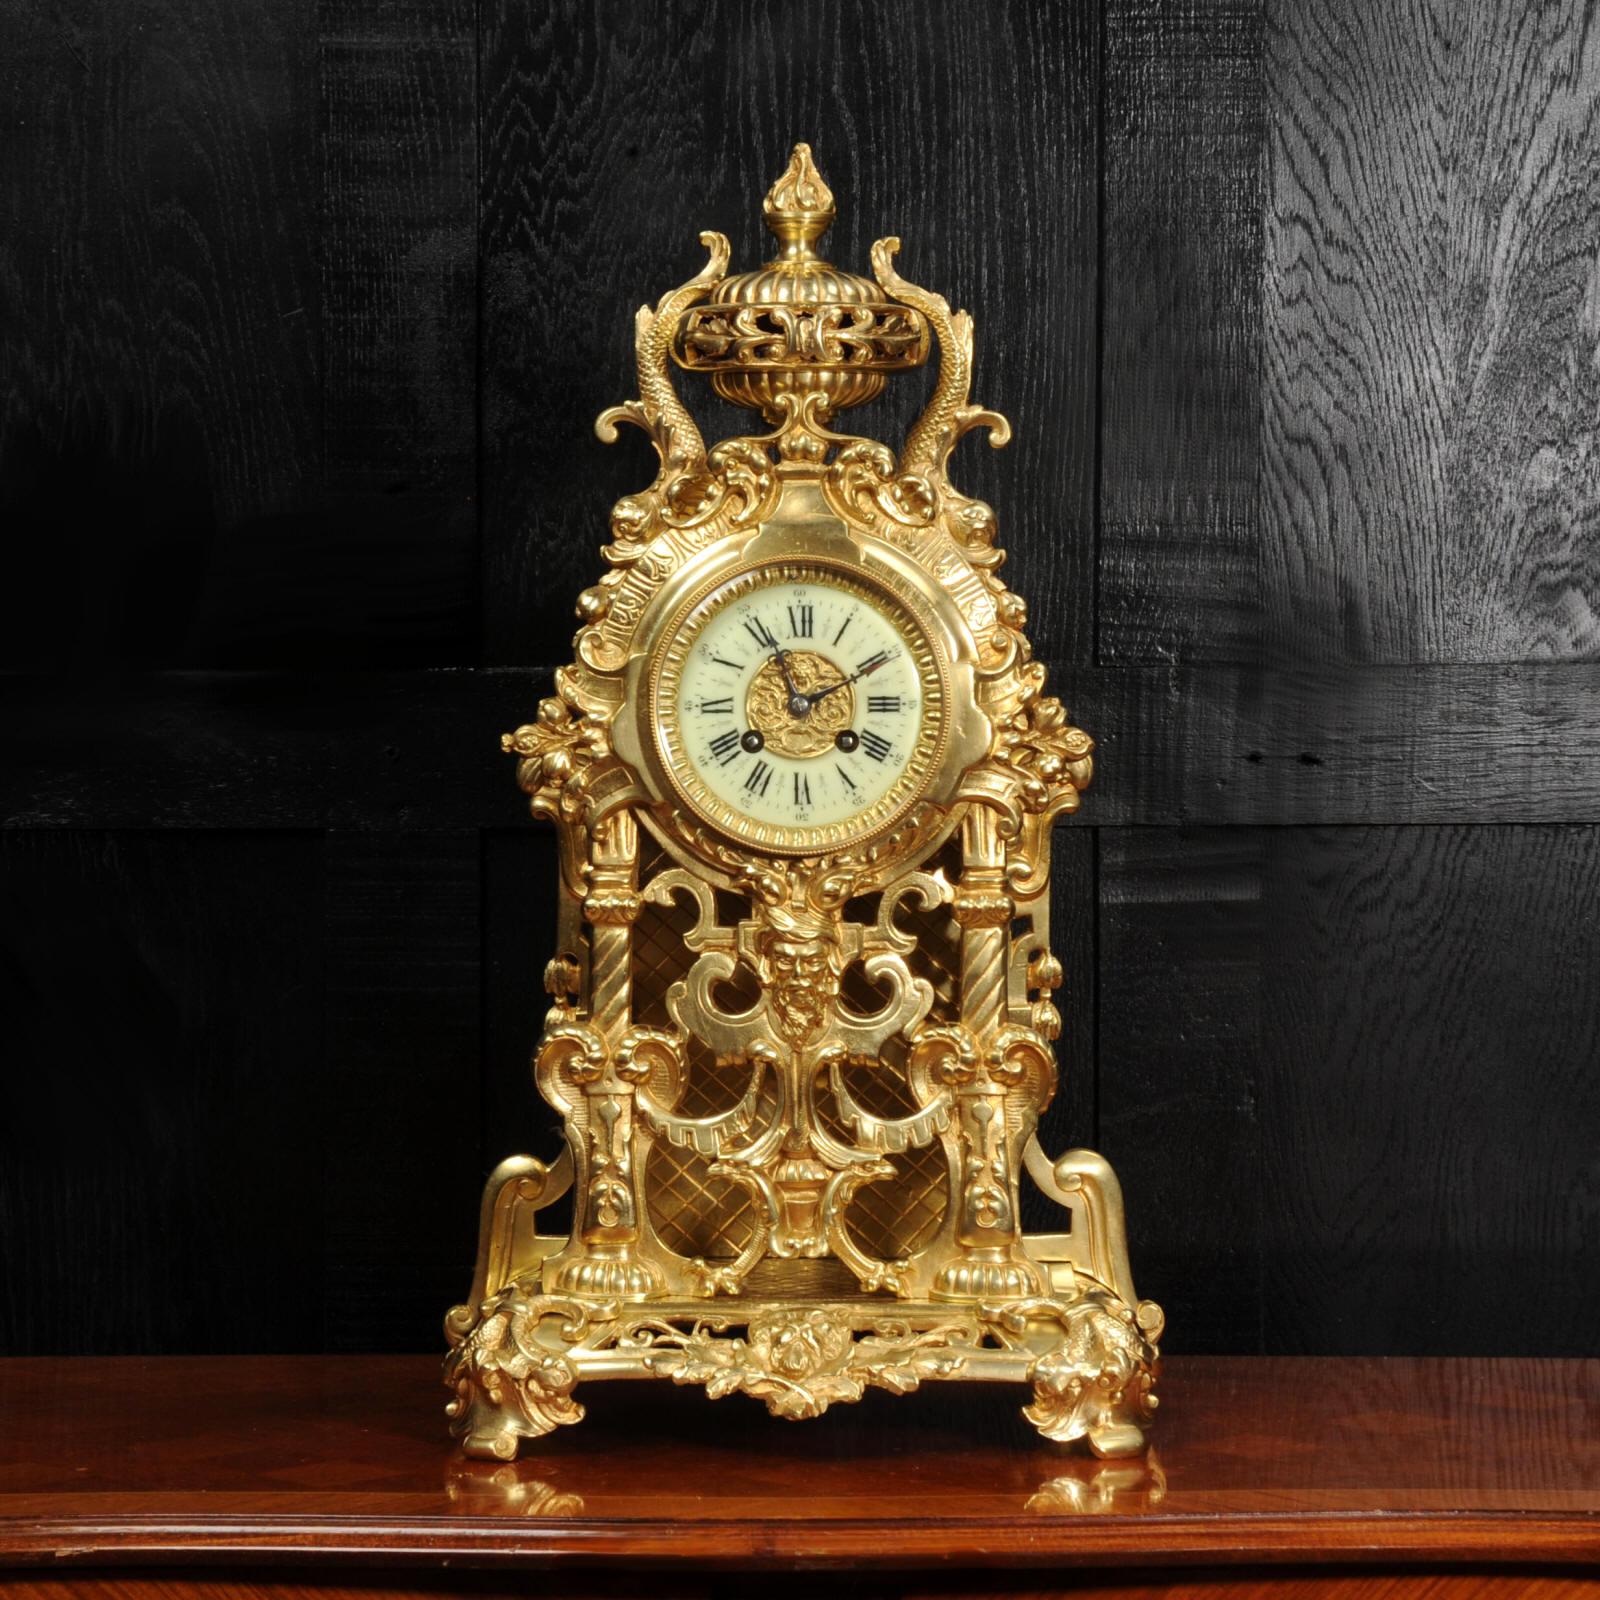 A large and superb antique French gilt bronze clock, circa 1880. It is beautifully modelled in the Baroque style, boldly formed of scrolling panels with grotesque masks, and dolphins. To the top is a large urn with a flaming finial and dolphins.